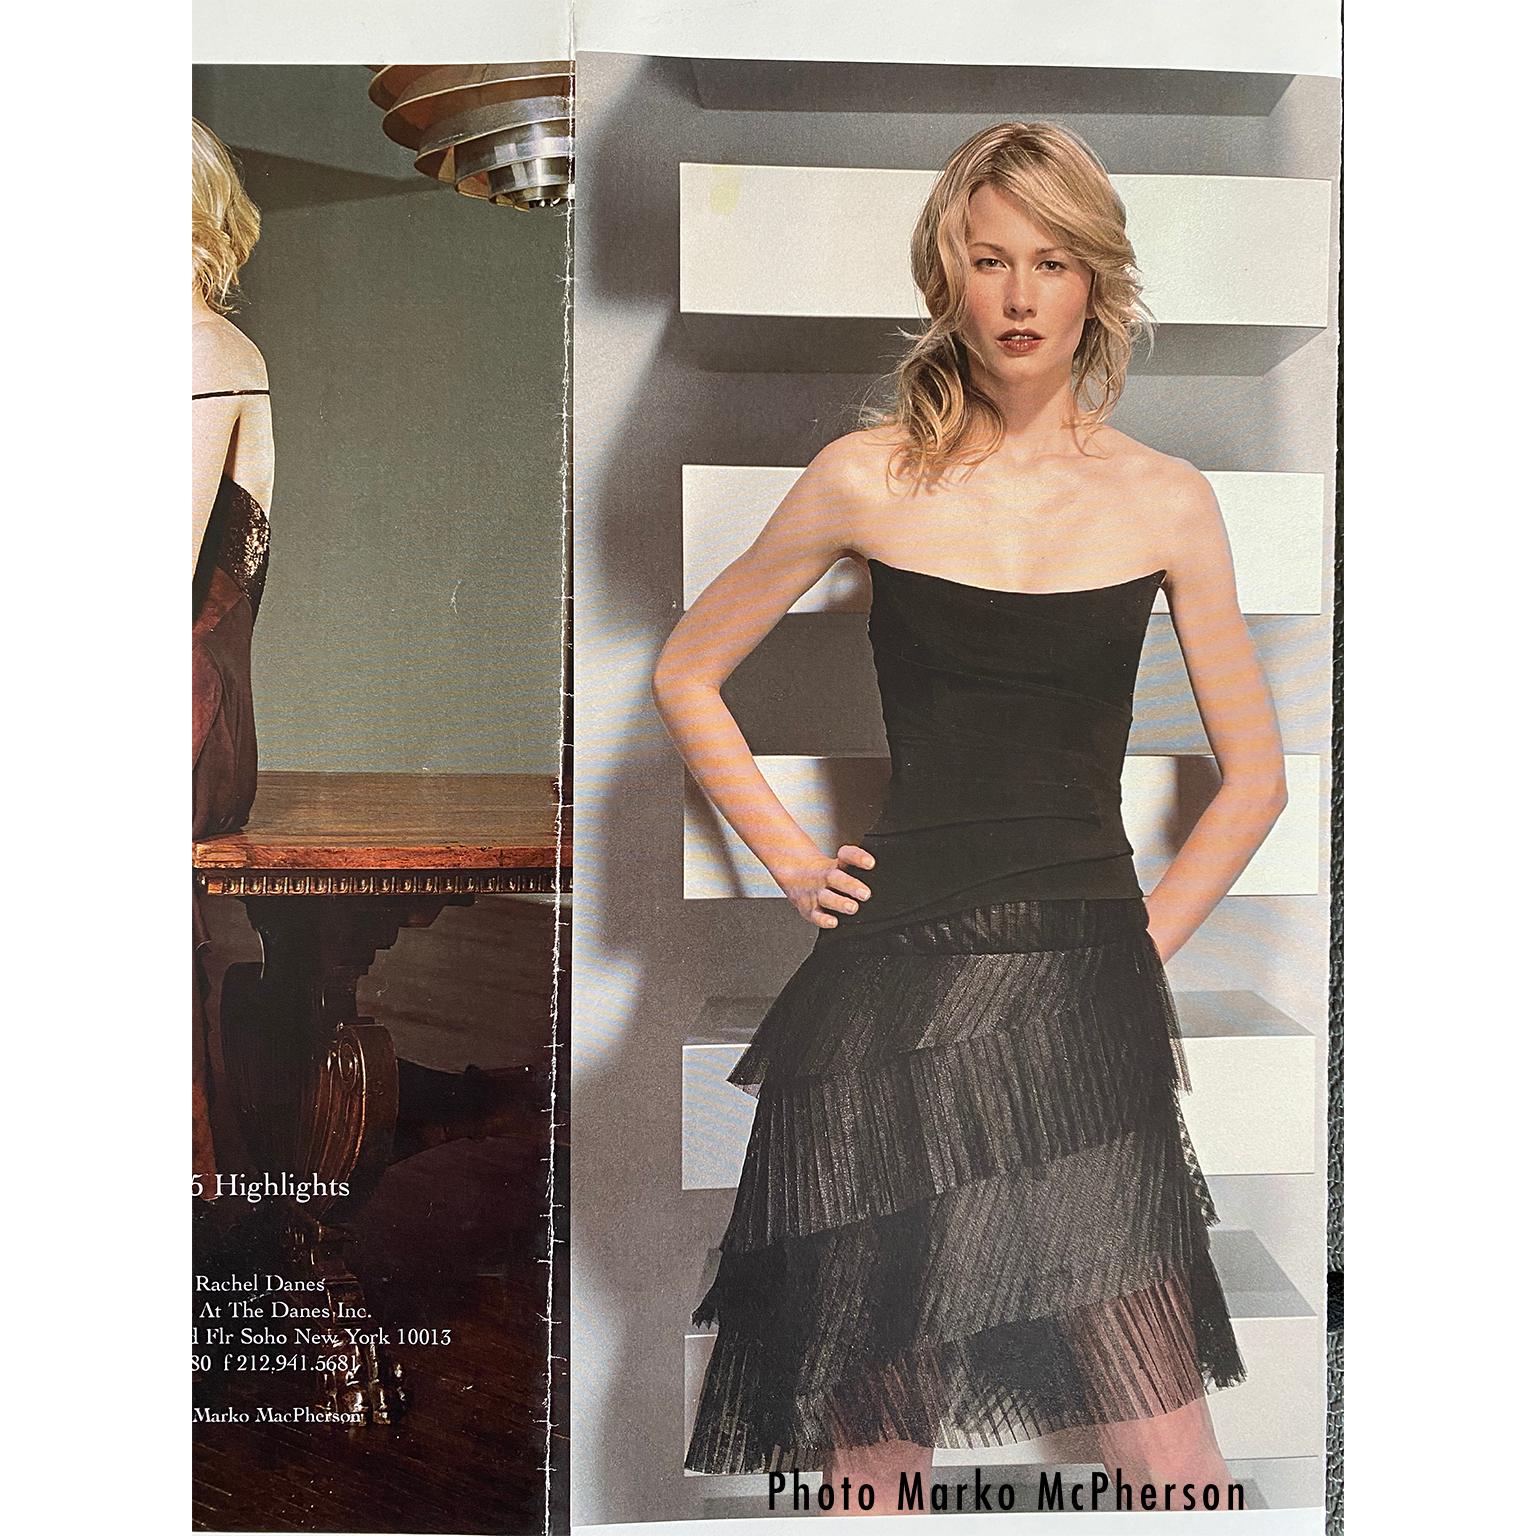 This Danes chocolate leather label designer black dress has so much style with its fitted black knit bodice with thin spaghetti straps, and dramatic pleated metallic tulle asymmetrical skirt!  This is such a perfect cocktail dress and it is in